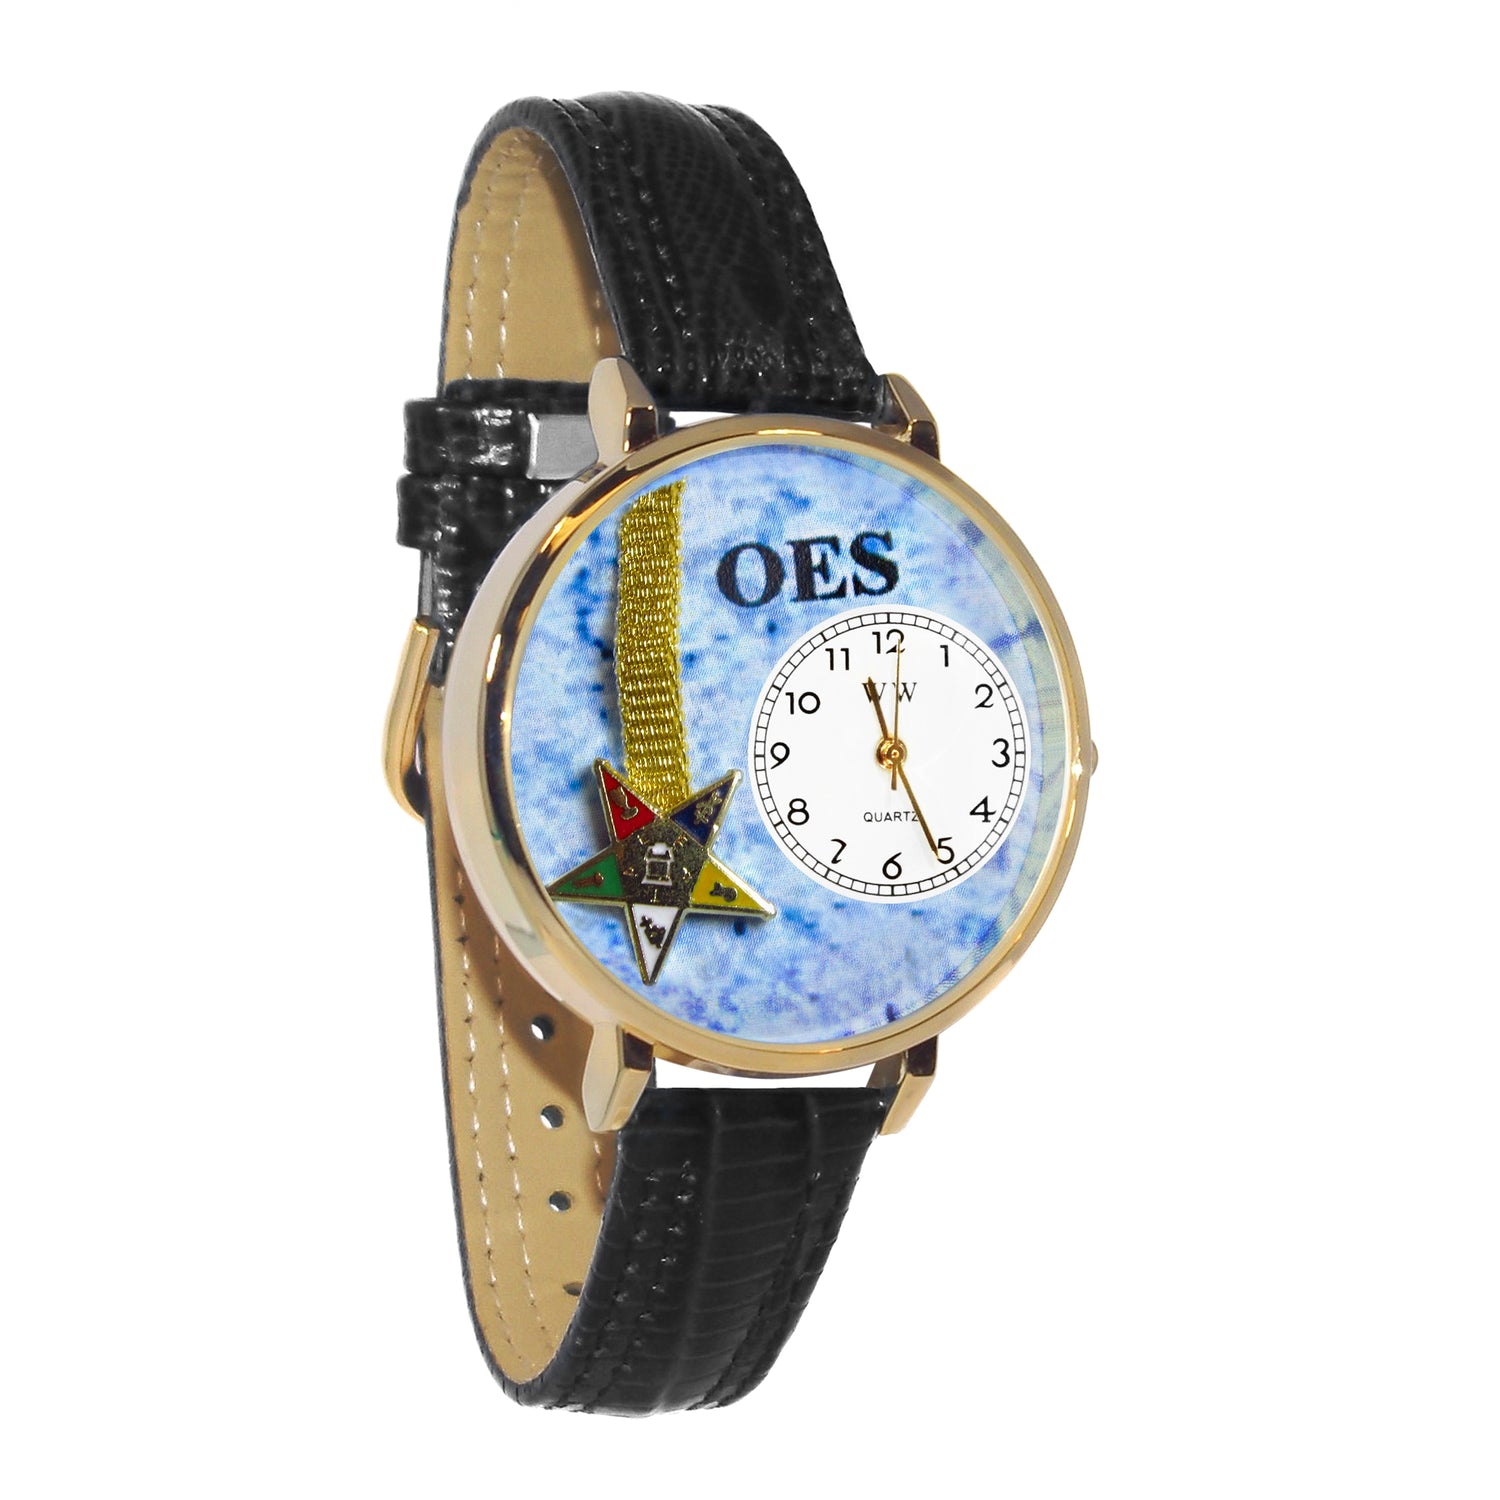 Whimsical Gifts | Order of the Eastern Star 3D Watch Large Style | Handmade in USA | Hobbies & Special Interests | Order of the Eastern Star | Novelty Unique Fun Miniatures Gift | Gold Finish Black Leather Watch Band